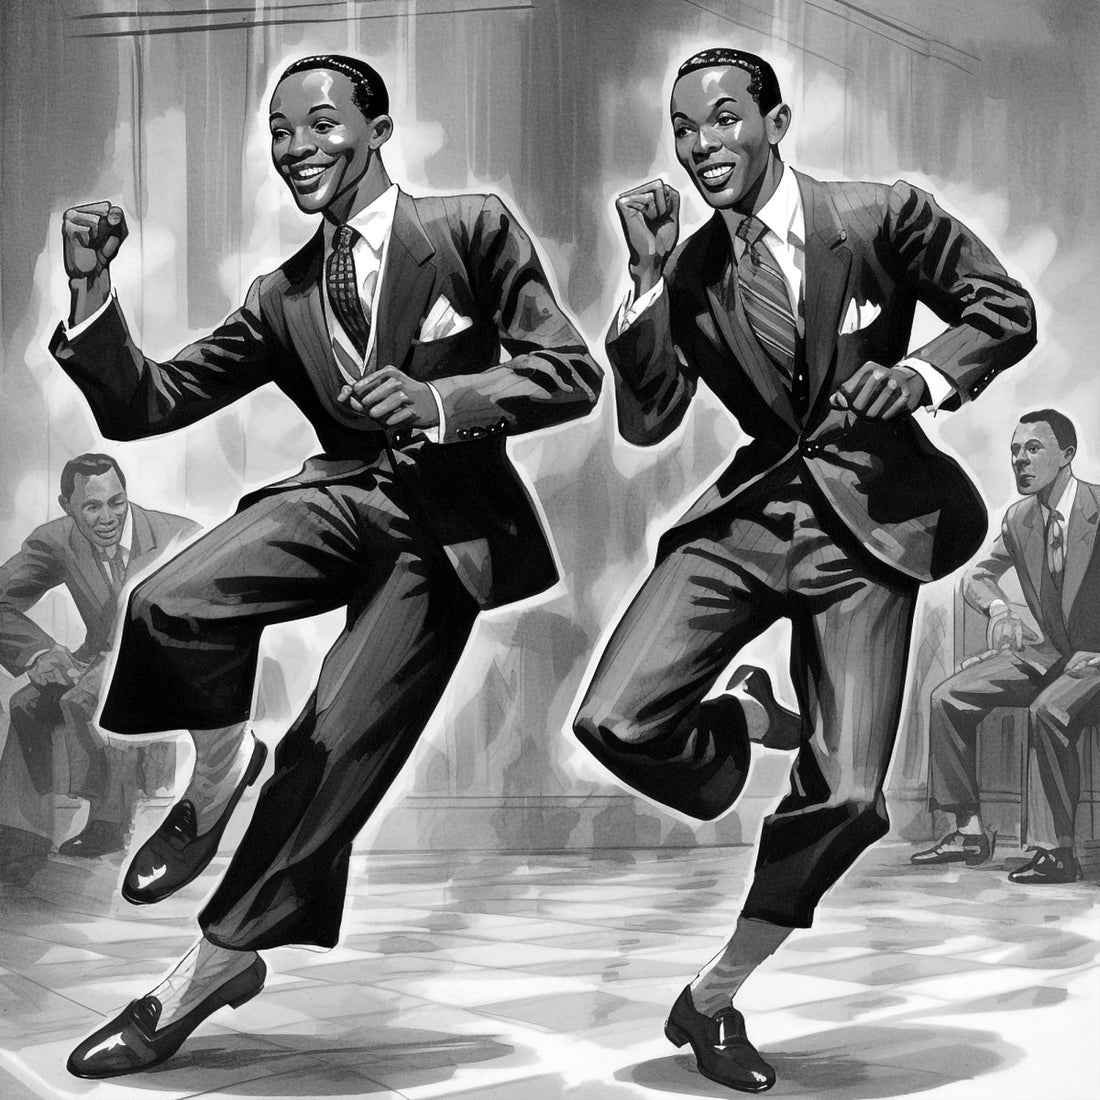 Revisiting the Nicholas Brothers' Memorable Dance in Stormy Weather - The Trini Gee